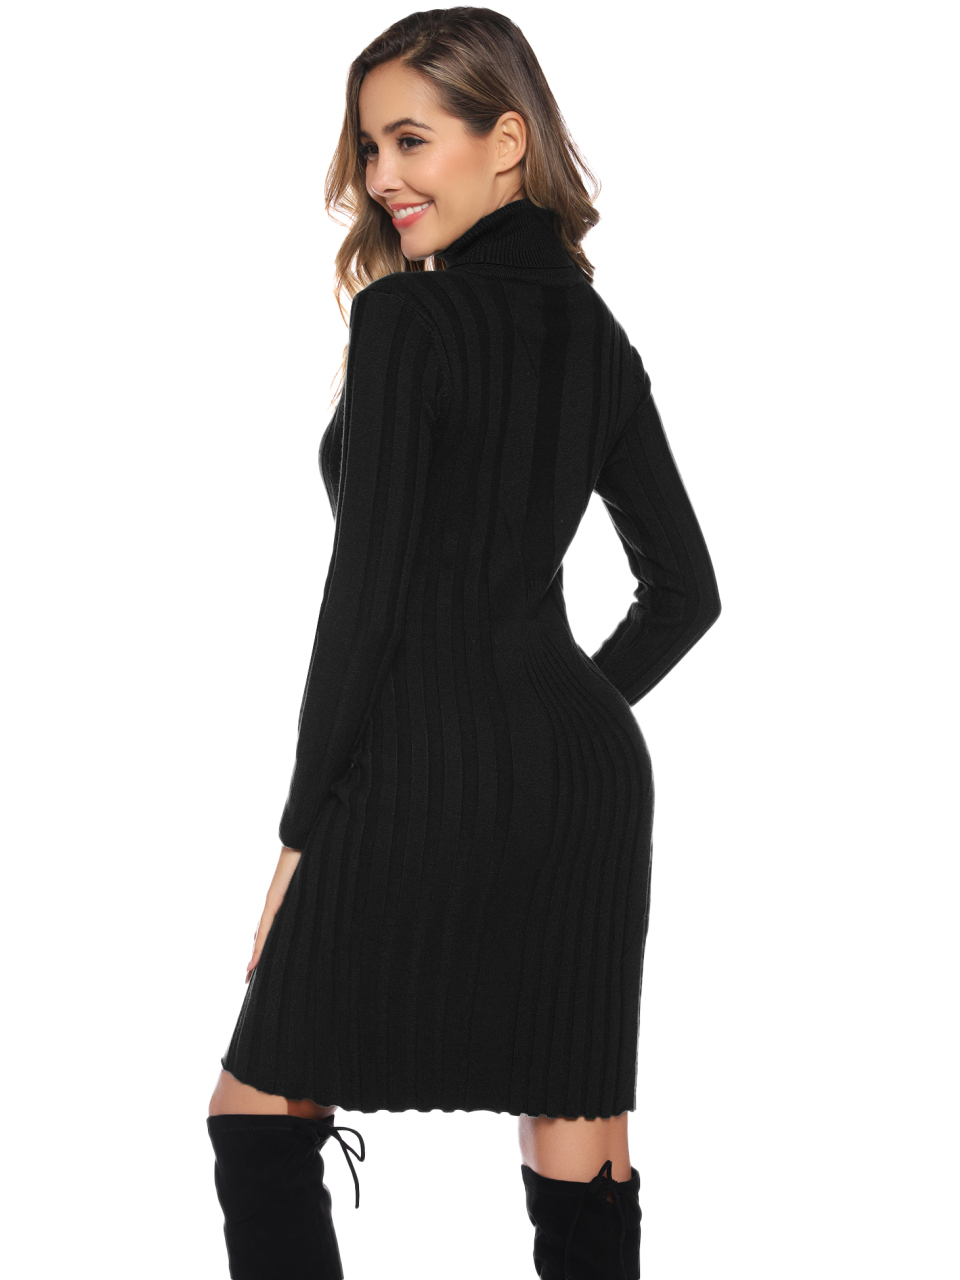 Casual/  Comfortable And Warm Ladies Turtleneck Sweater Dress